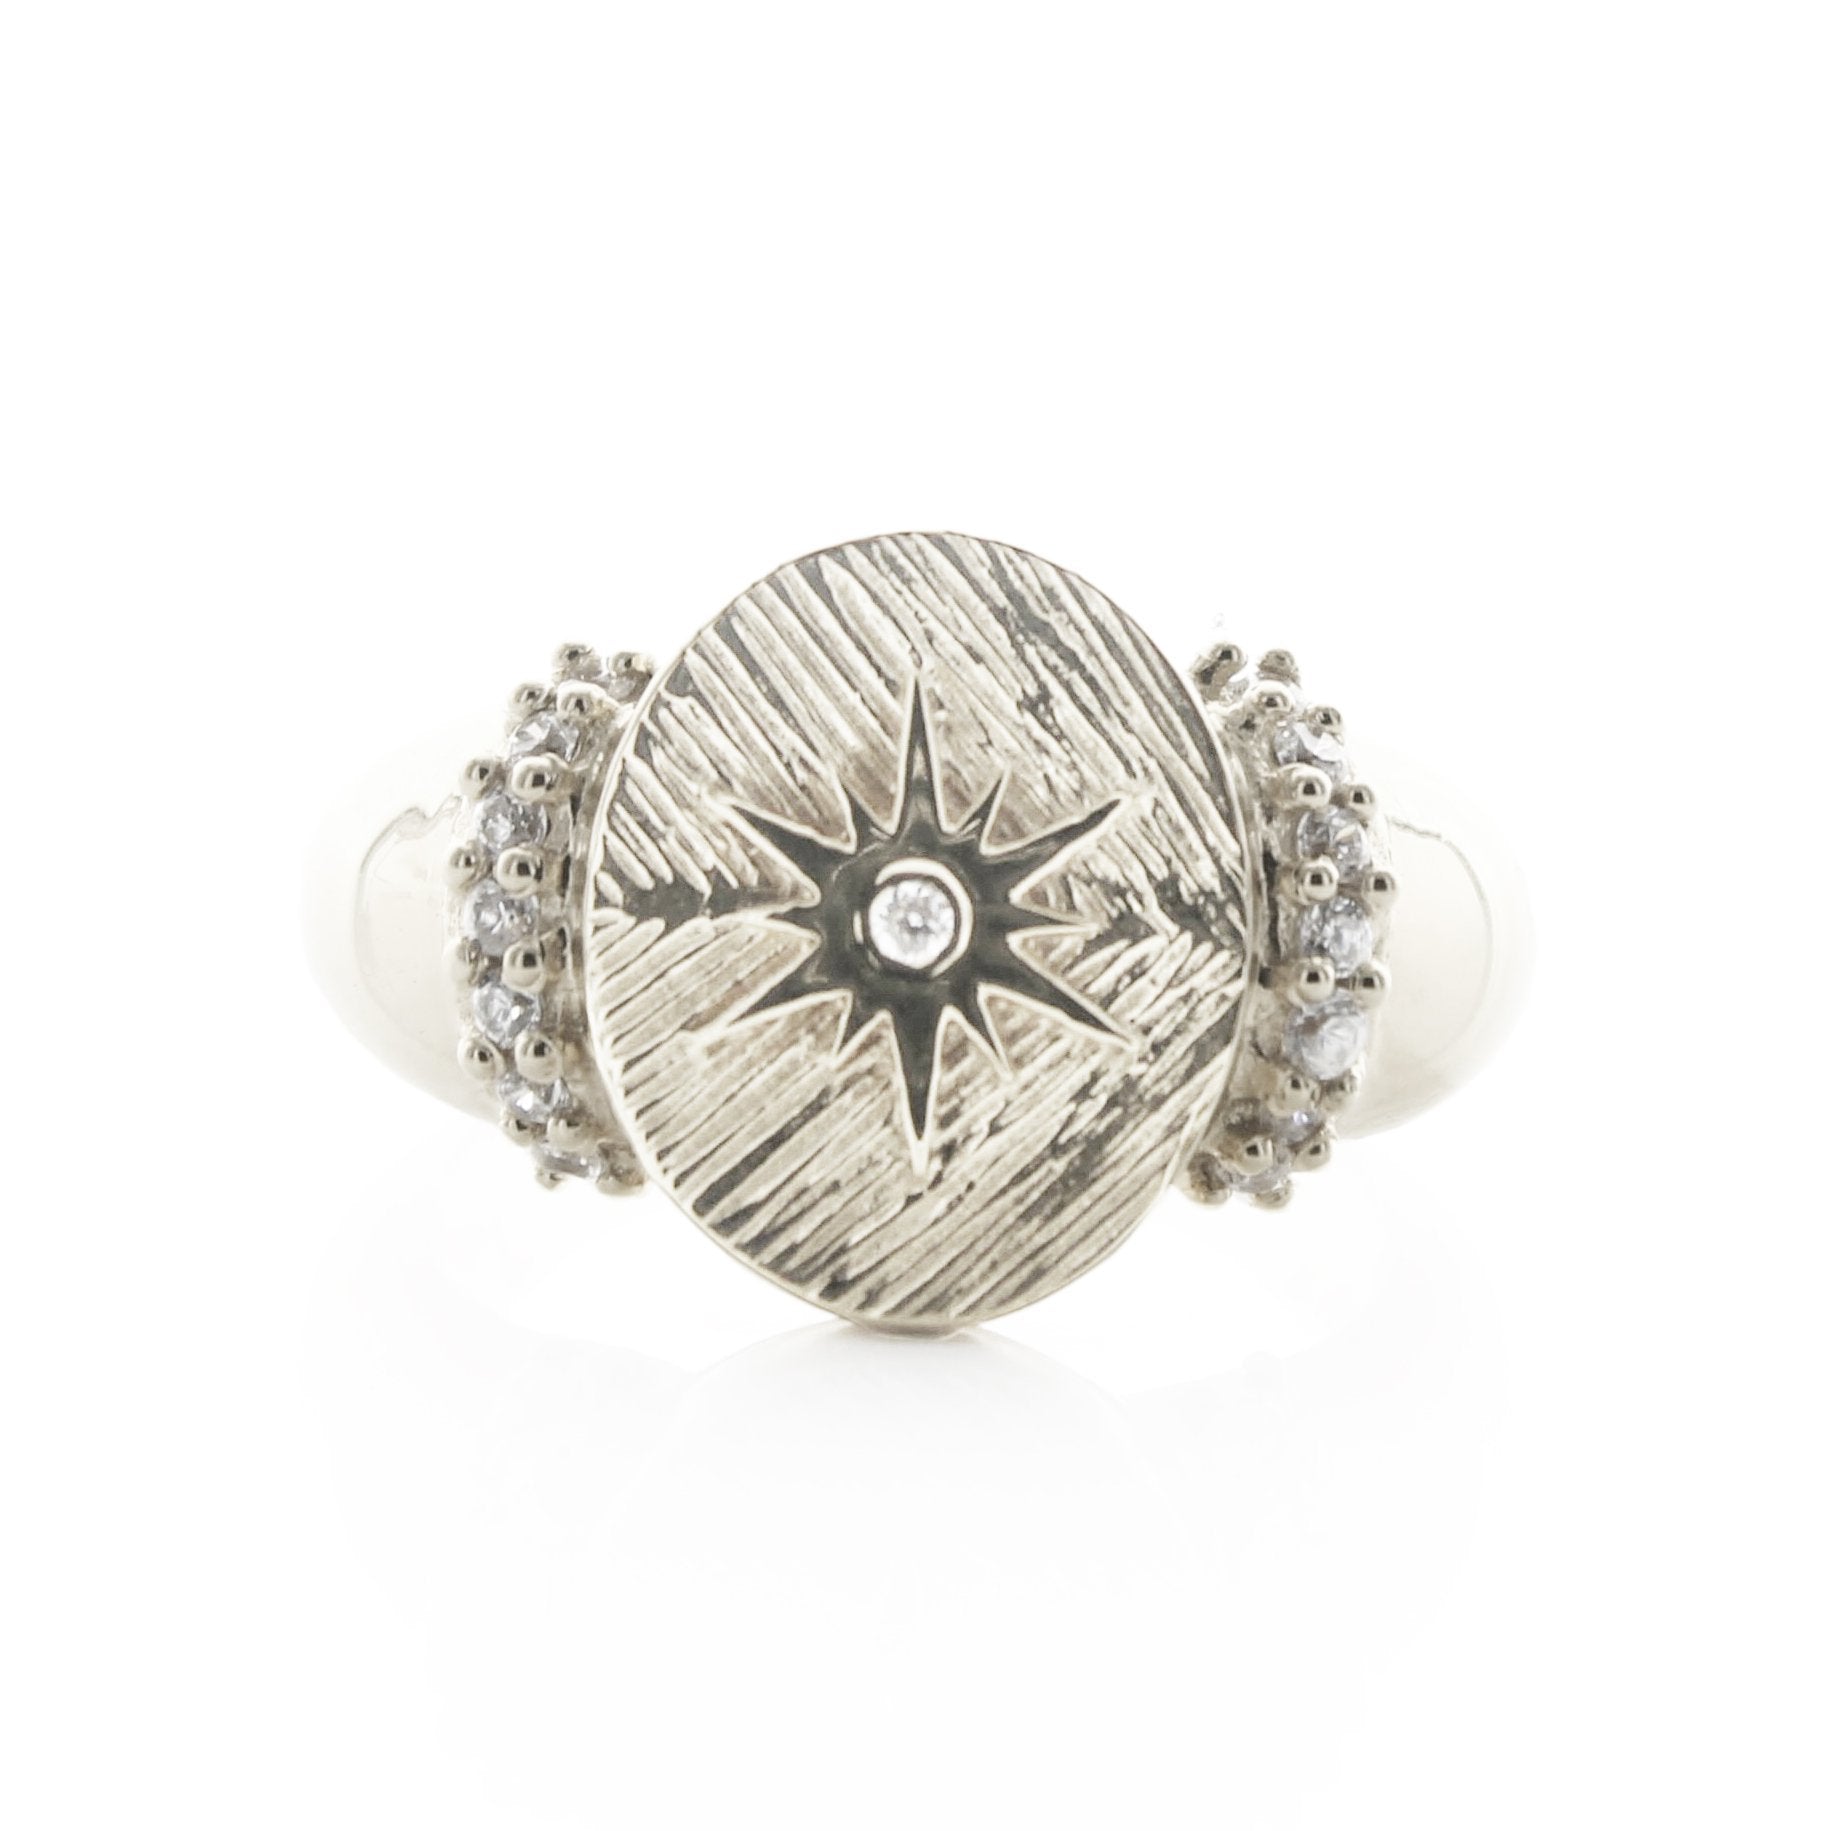 BELIEVE STELLAR COCKTAIL RING - CUBIC ZIRCONIA & SILVER - SO PRETTY CARA COTTER